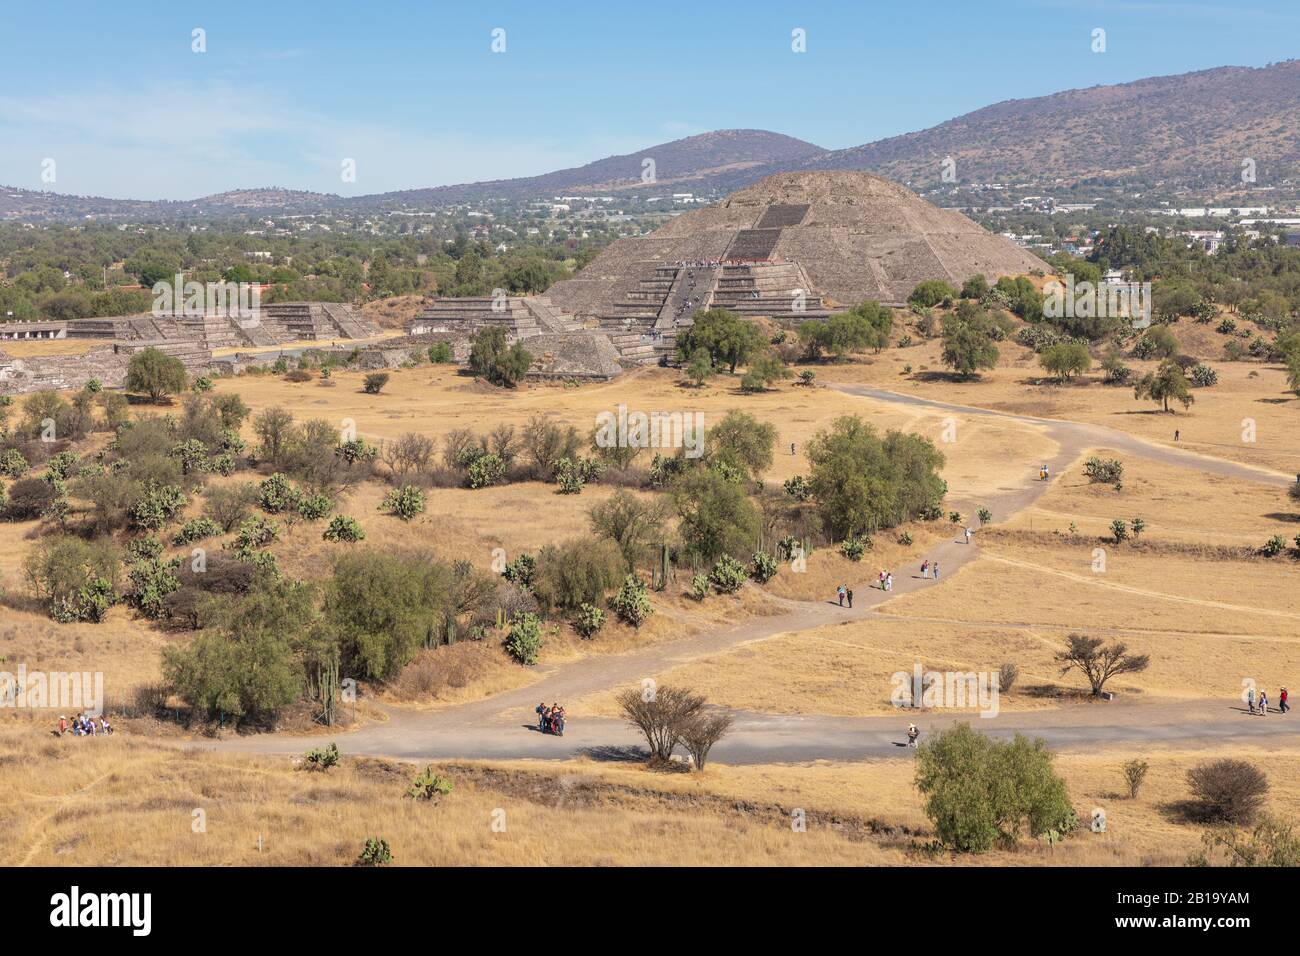 The Pyramids in ancient city of Teotihuacan in Mexico. Stock Photo